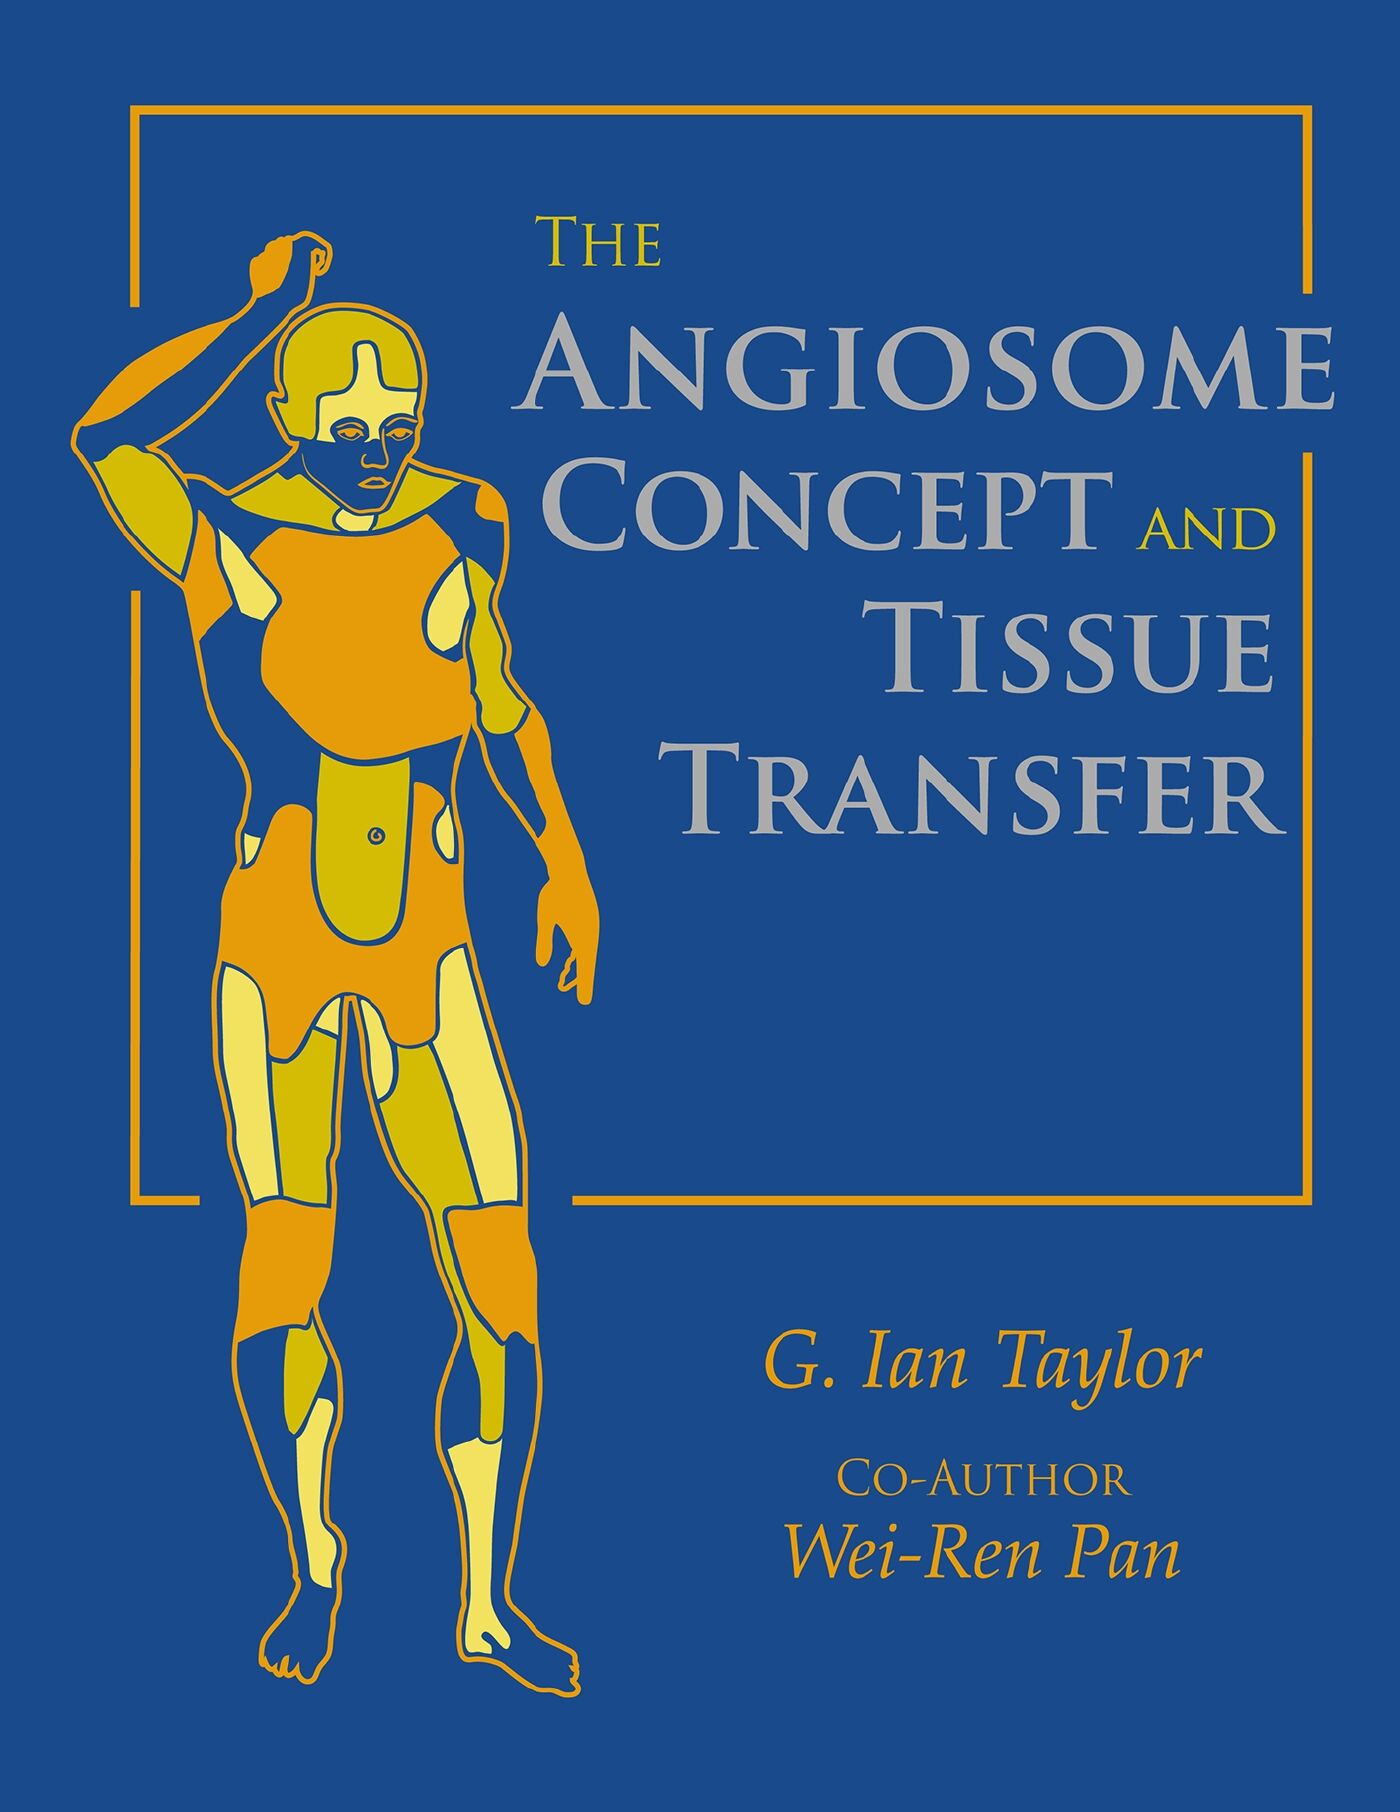 The Angiosome Concept and Tissue Transfer, 9781626236318